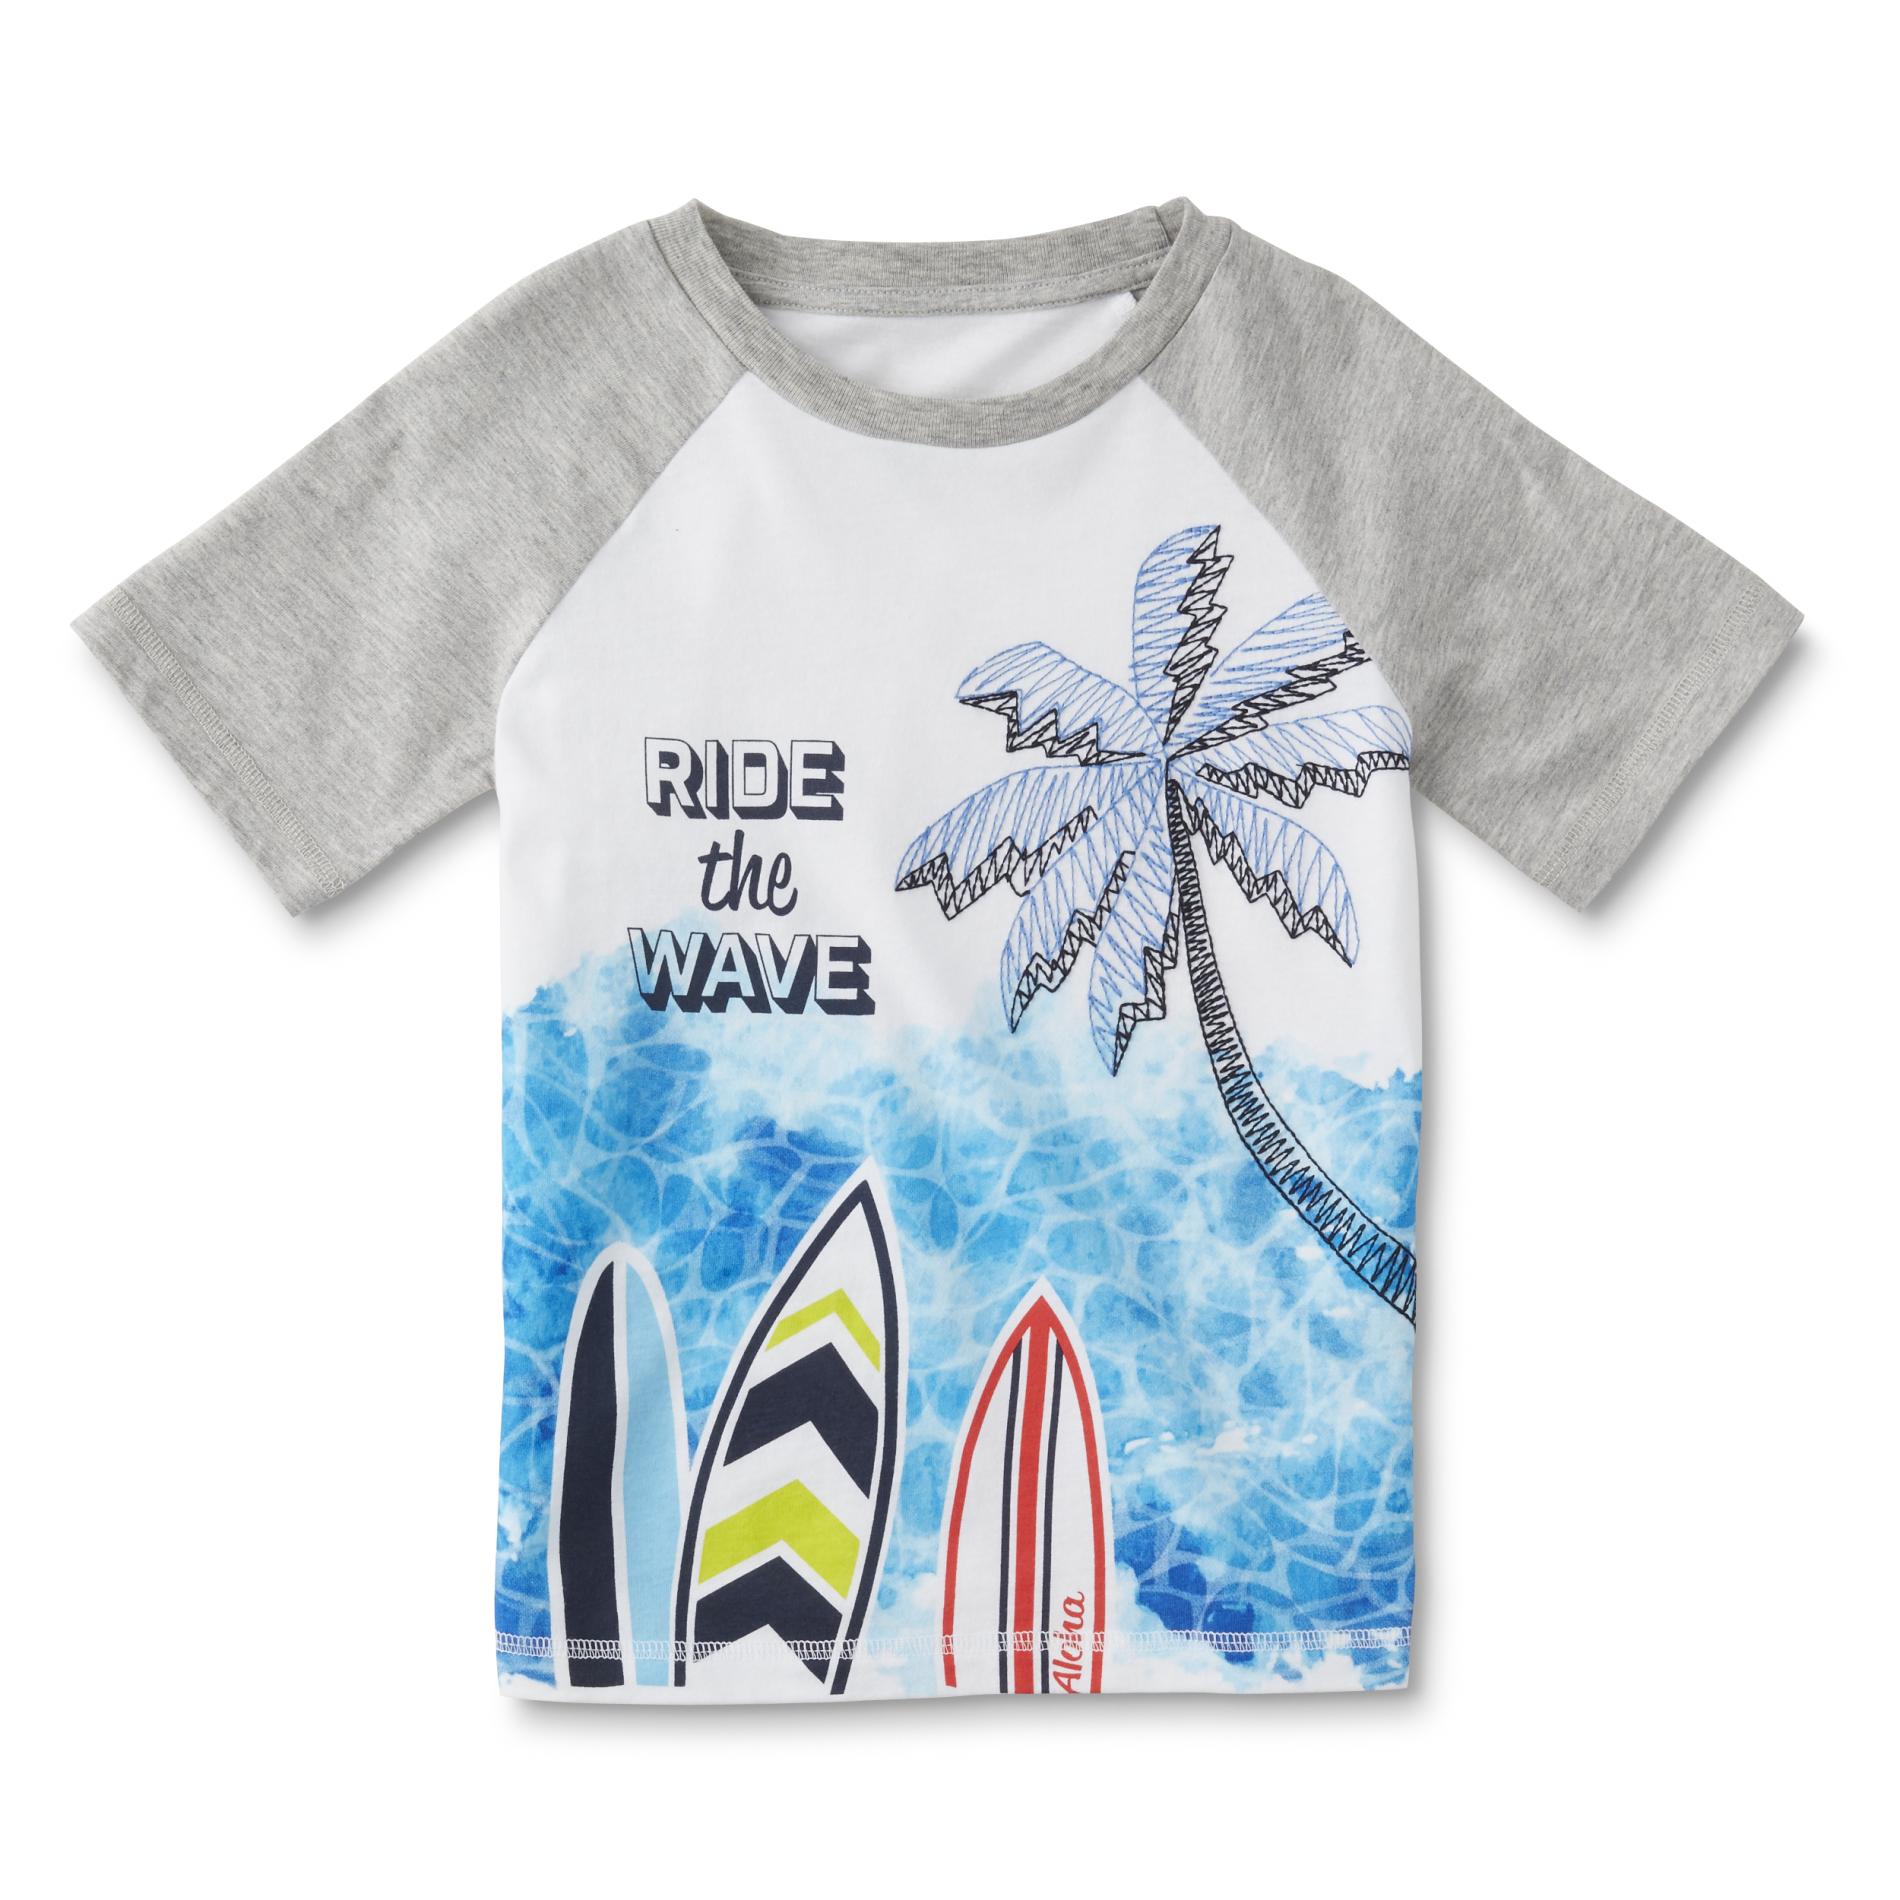 Toughskins Boys' Graphic T-Shirt - Ride the Wave